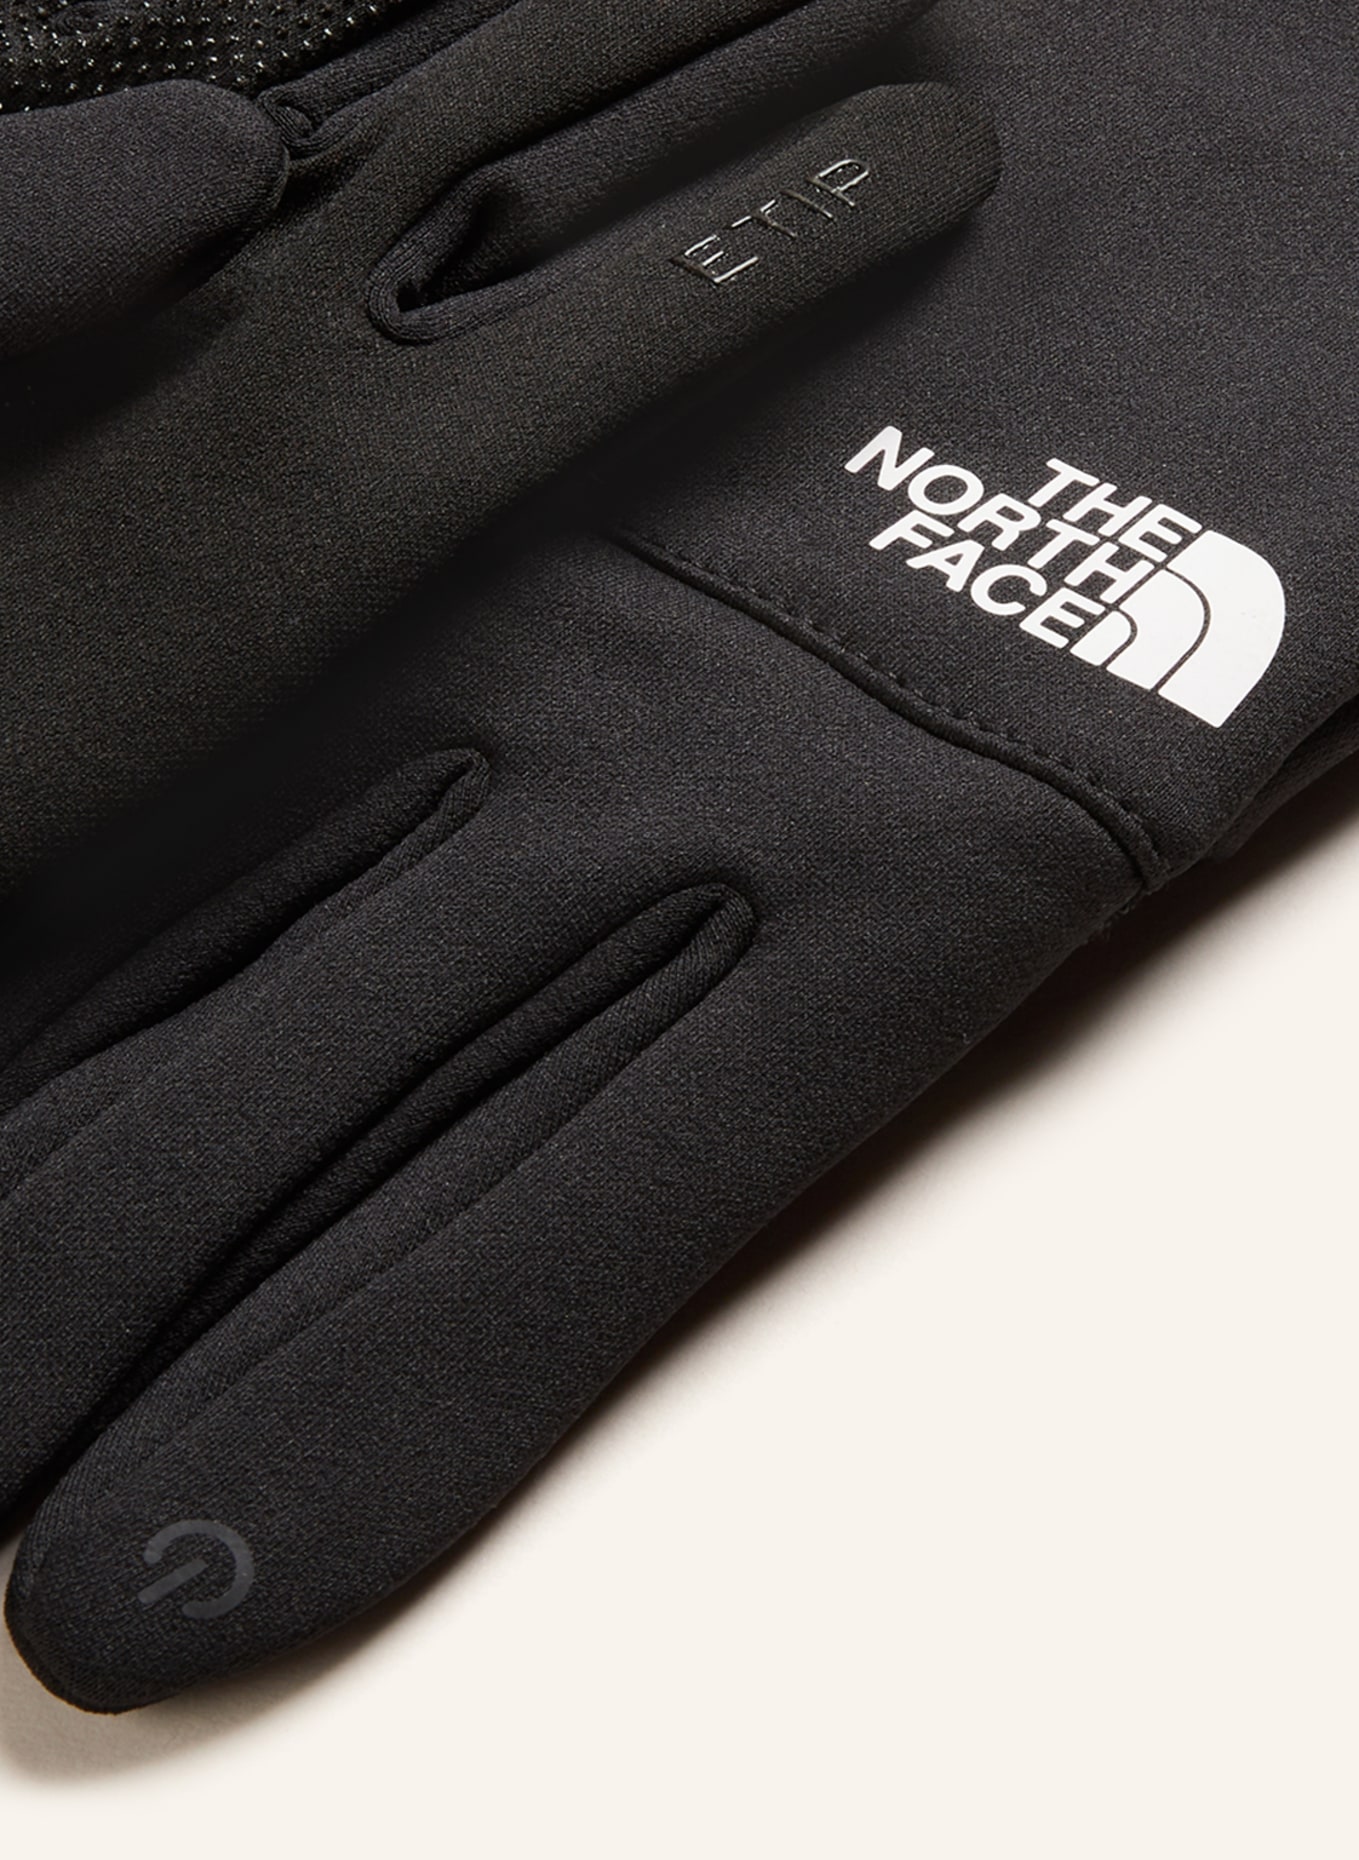 in function with gloves black/ touchscreen NORTH FACE THE Multisport ETIP white